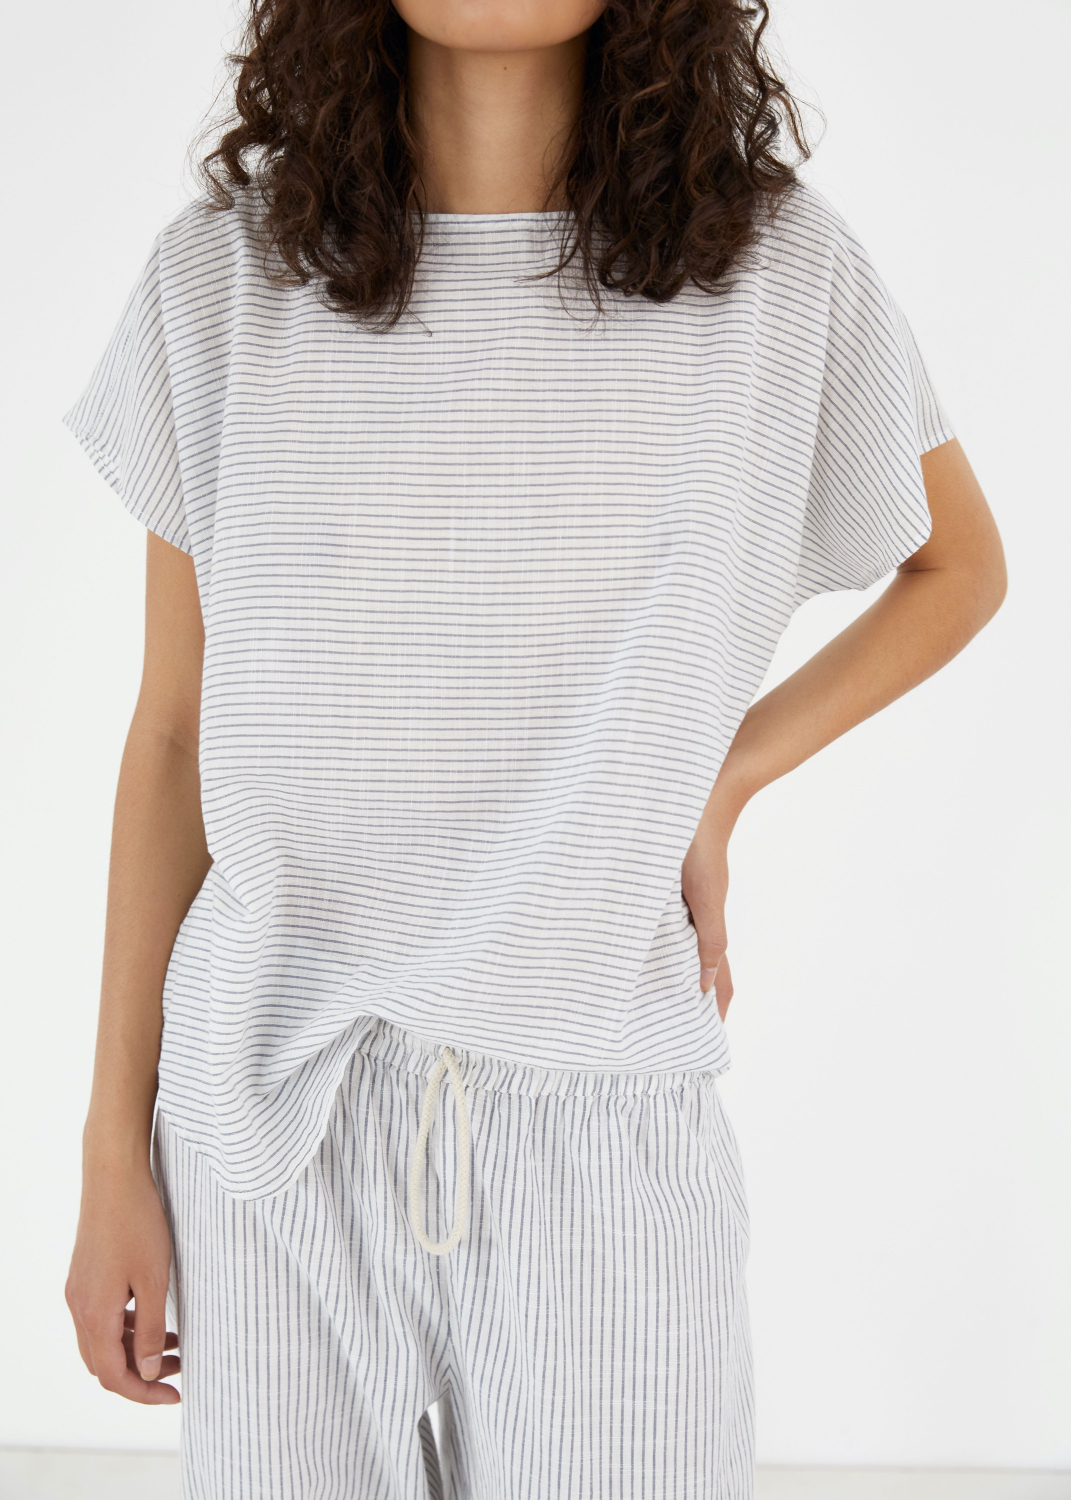 Blouses & Tops - Hope Top Striped